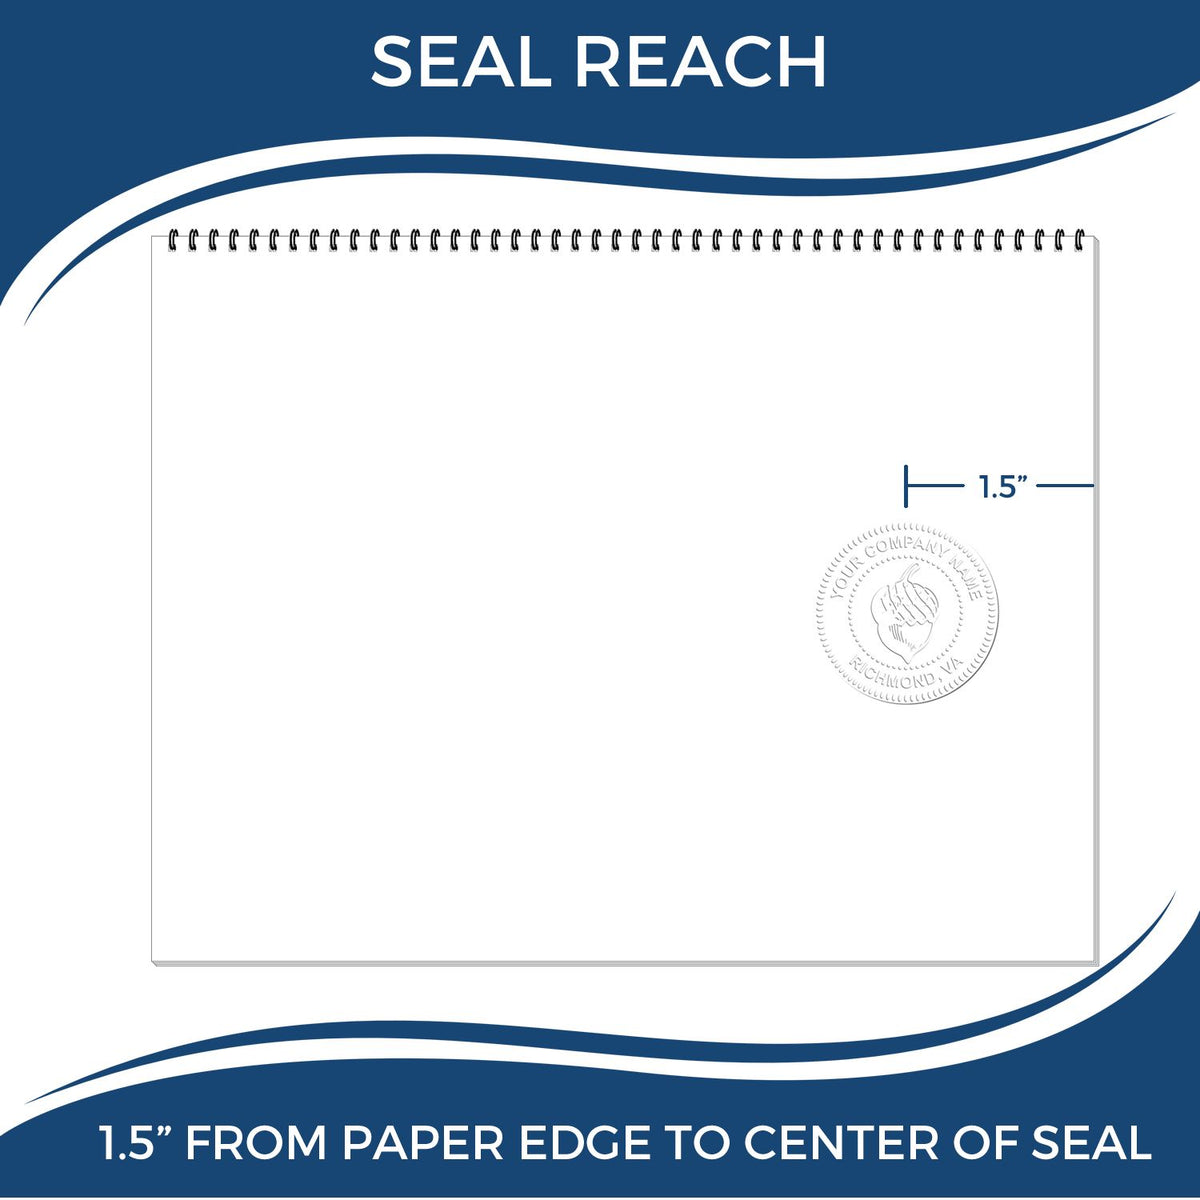 An infographic showing the seal reach which is represented by a ruler and a miniature seal image of the Soft Pocket Mississippi Landscape Architect Embosser